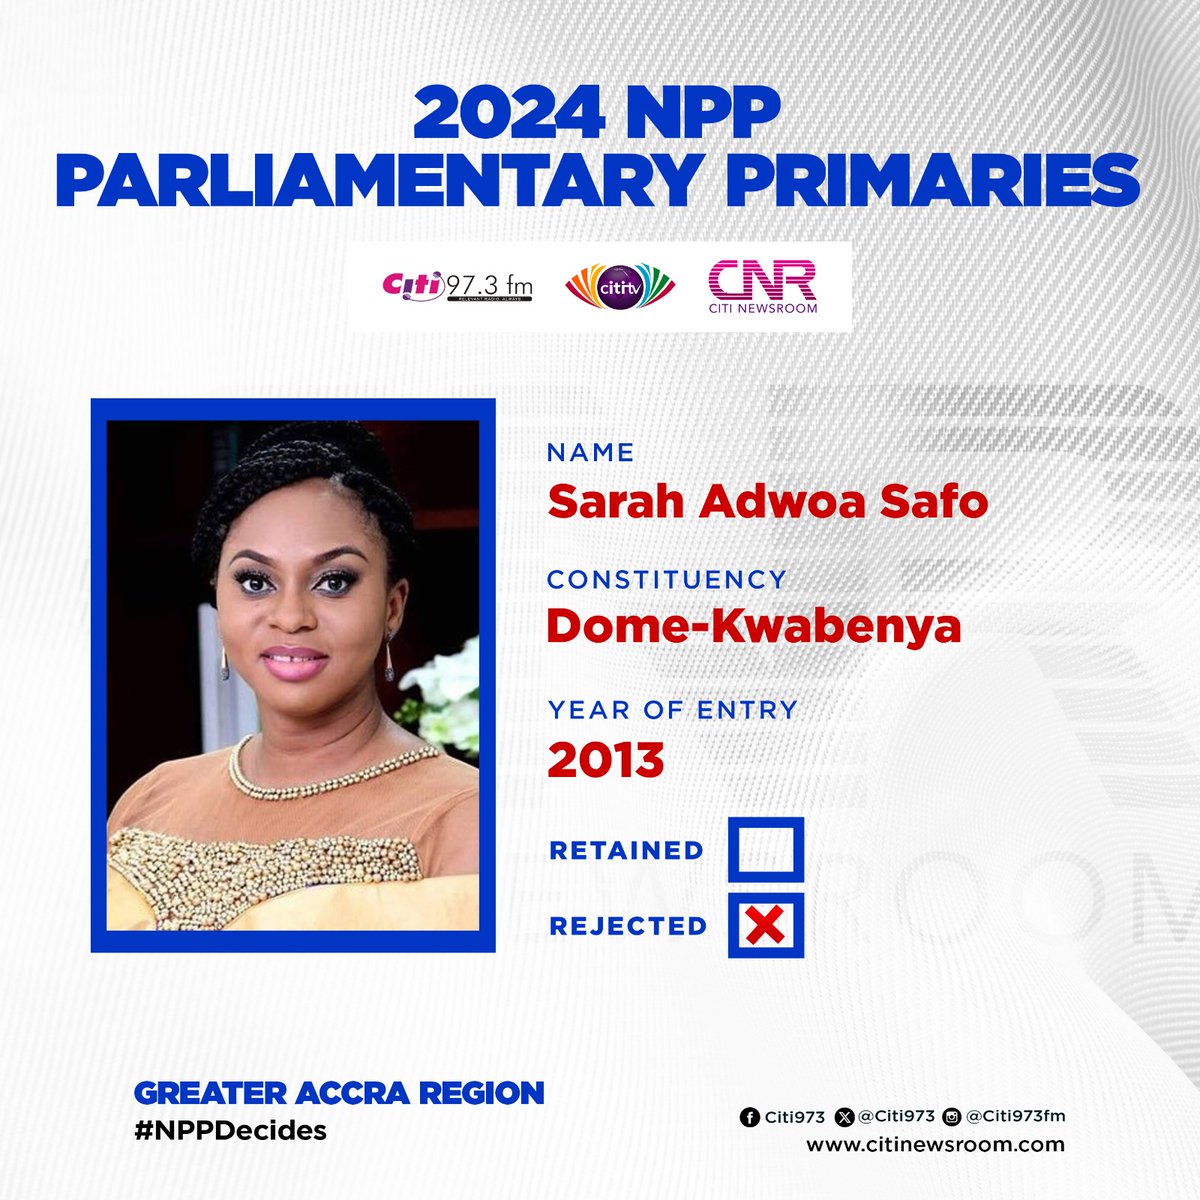 Thread of MPs who lost in the NPP 2024 Parliamentary Primaries 1. Sarah Adwoa Safo || Dome-Kwabenya #CitiNewsroom #CNRDigital #NPPDecides